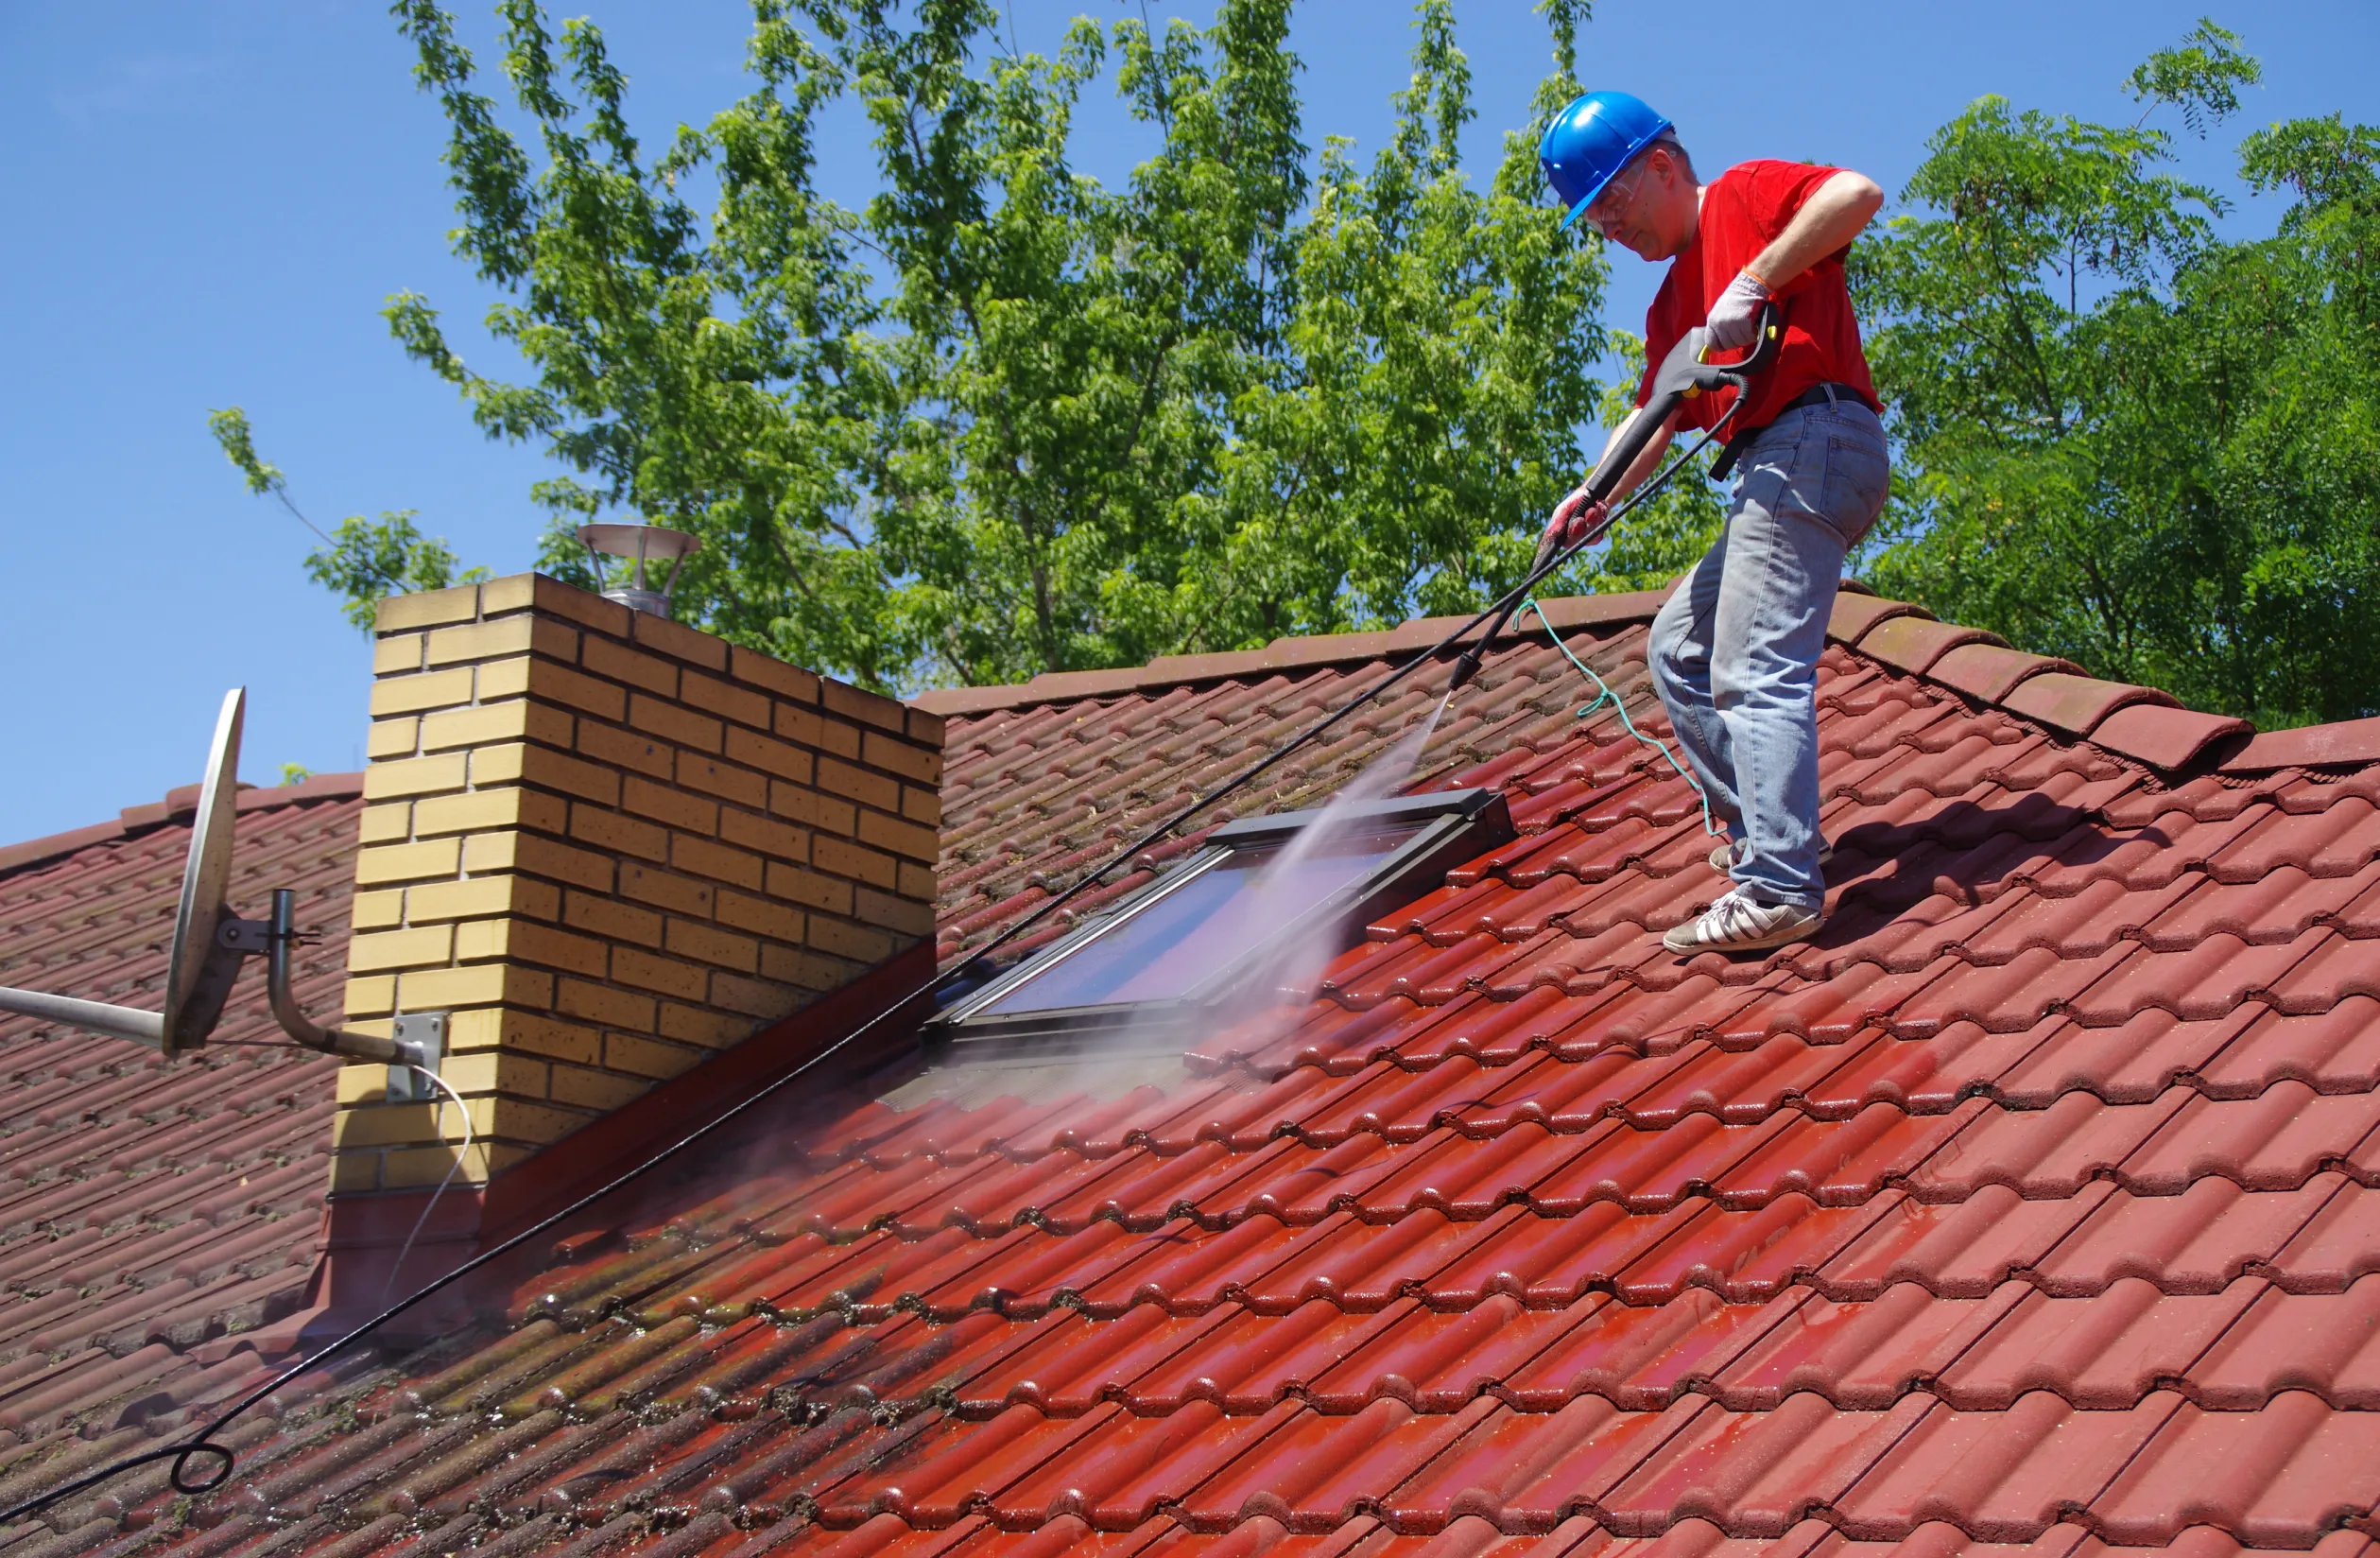 stock-photo-house-roof-cleaning-with-pressure-tool-worker-on-top-of-building-washing-tile-with-professional-1441302884